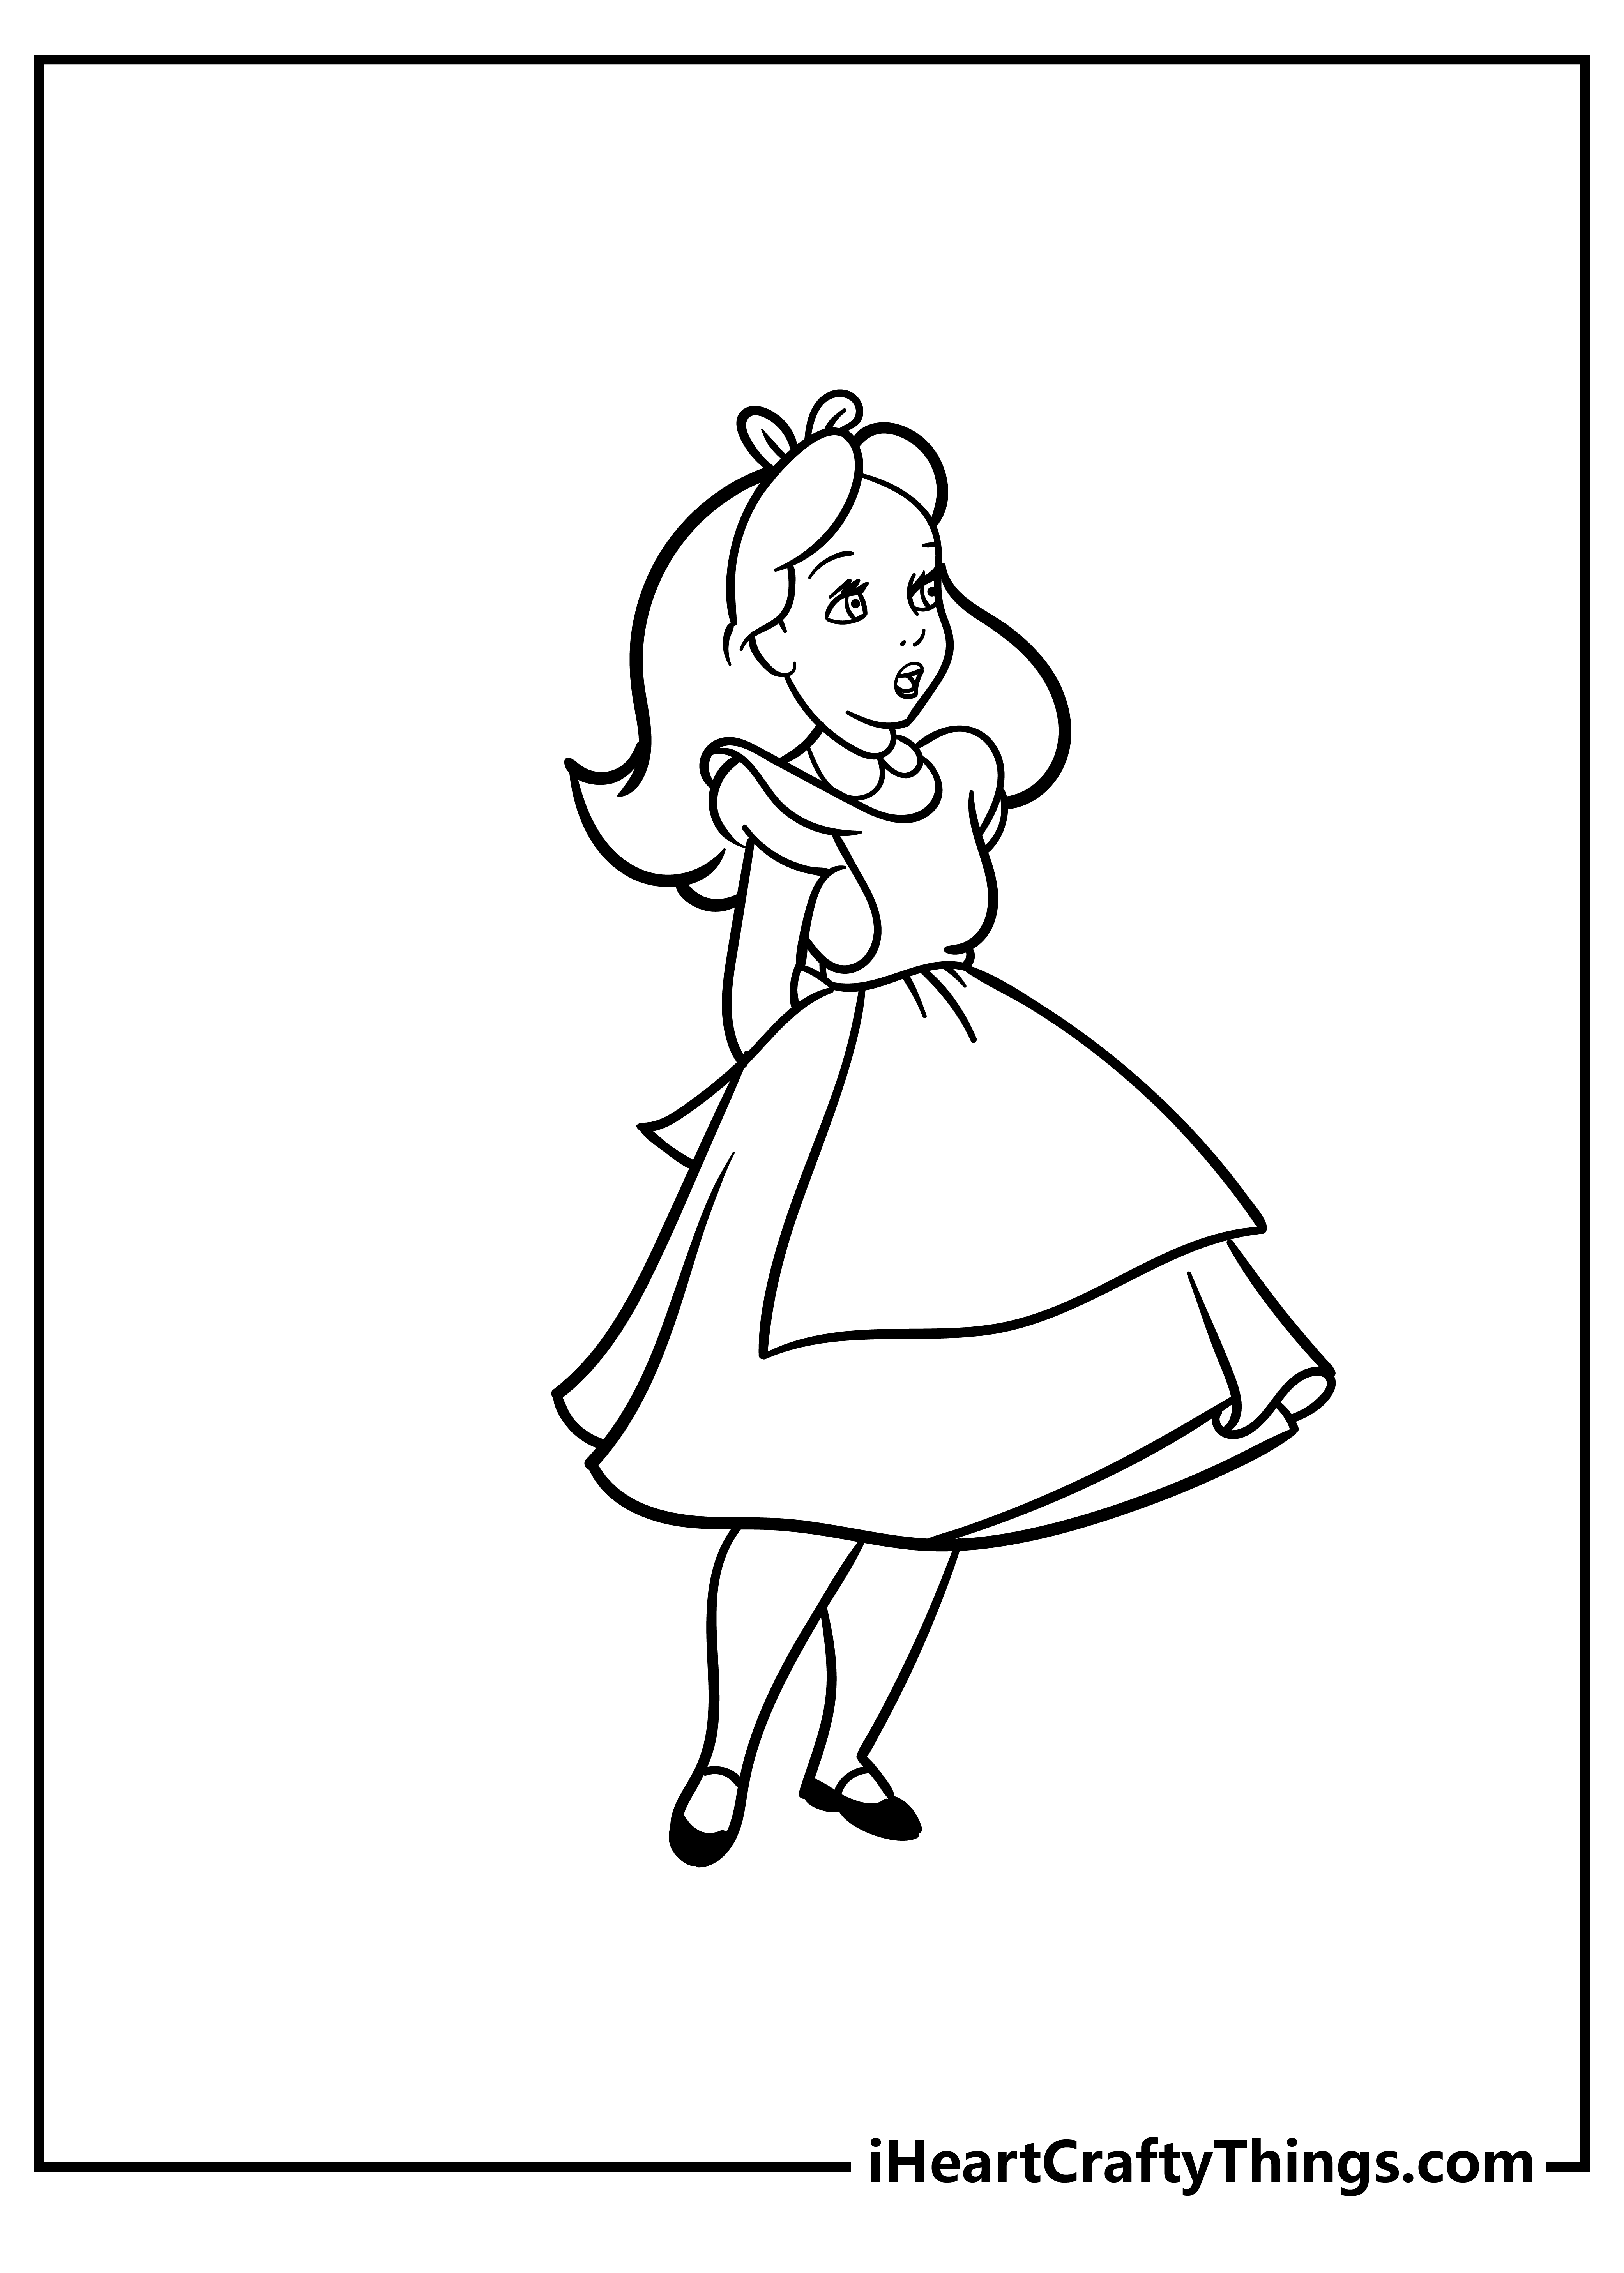 Alice In Wonderland Coloring Pages for adults free printable